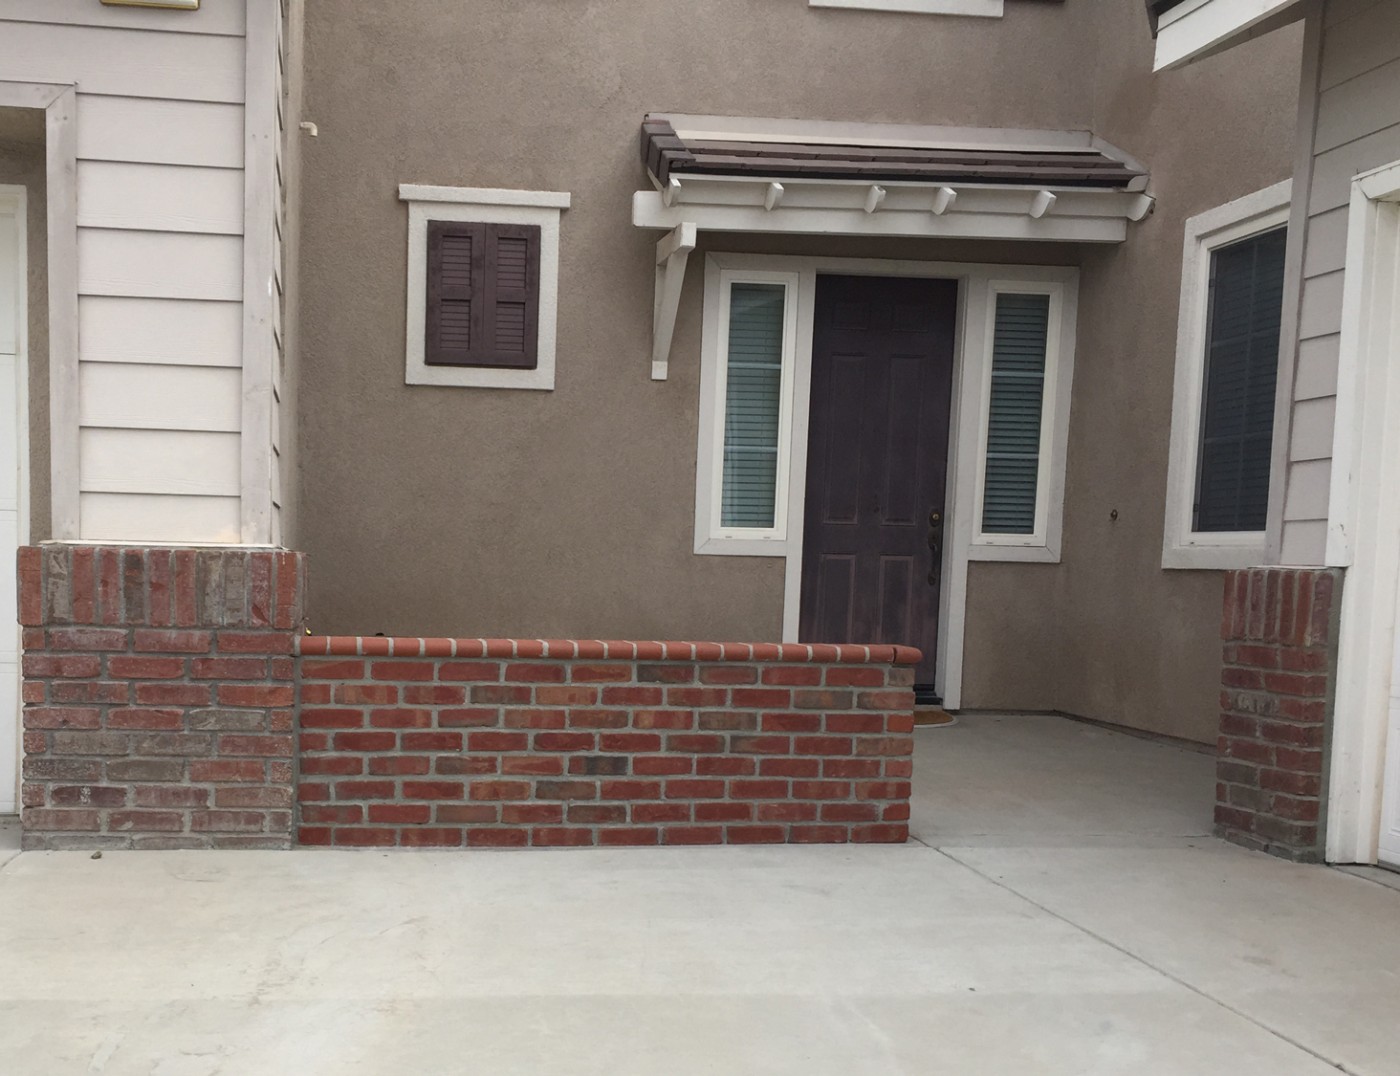 Brick faced wall in front courtyard in Temecula McCabe's Landscape Construction